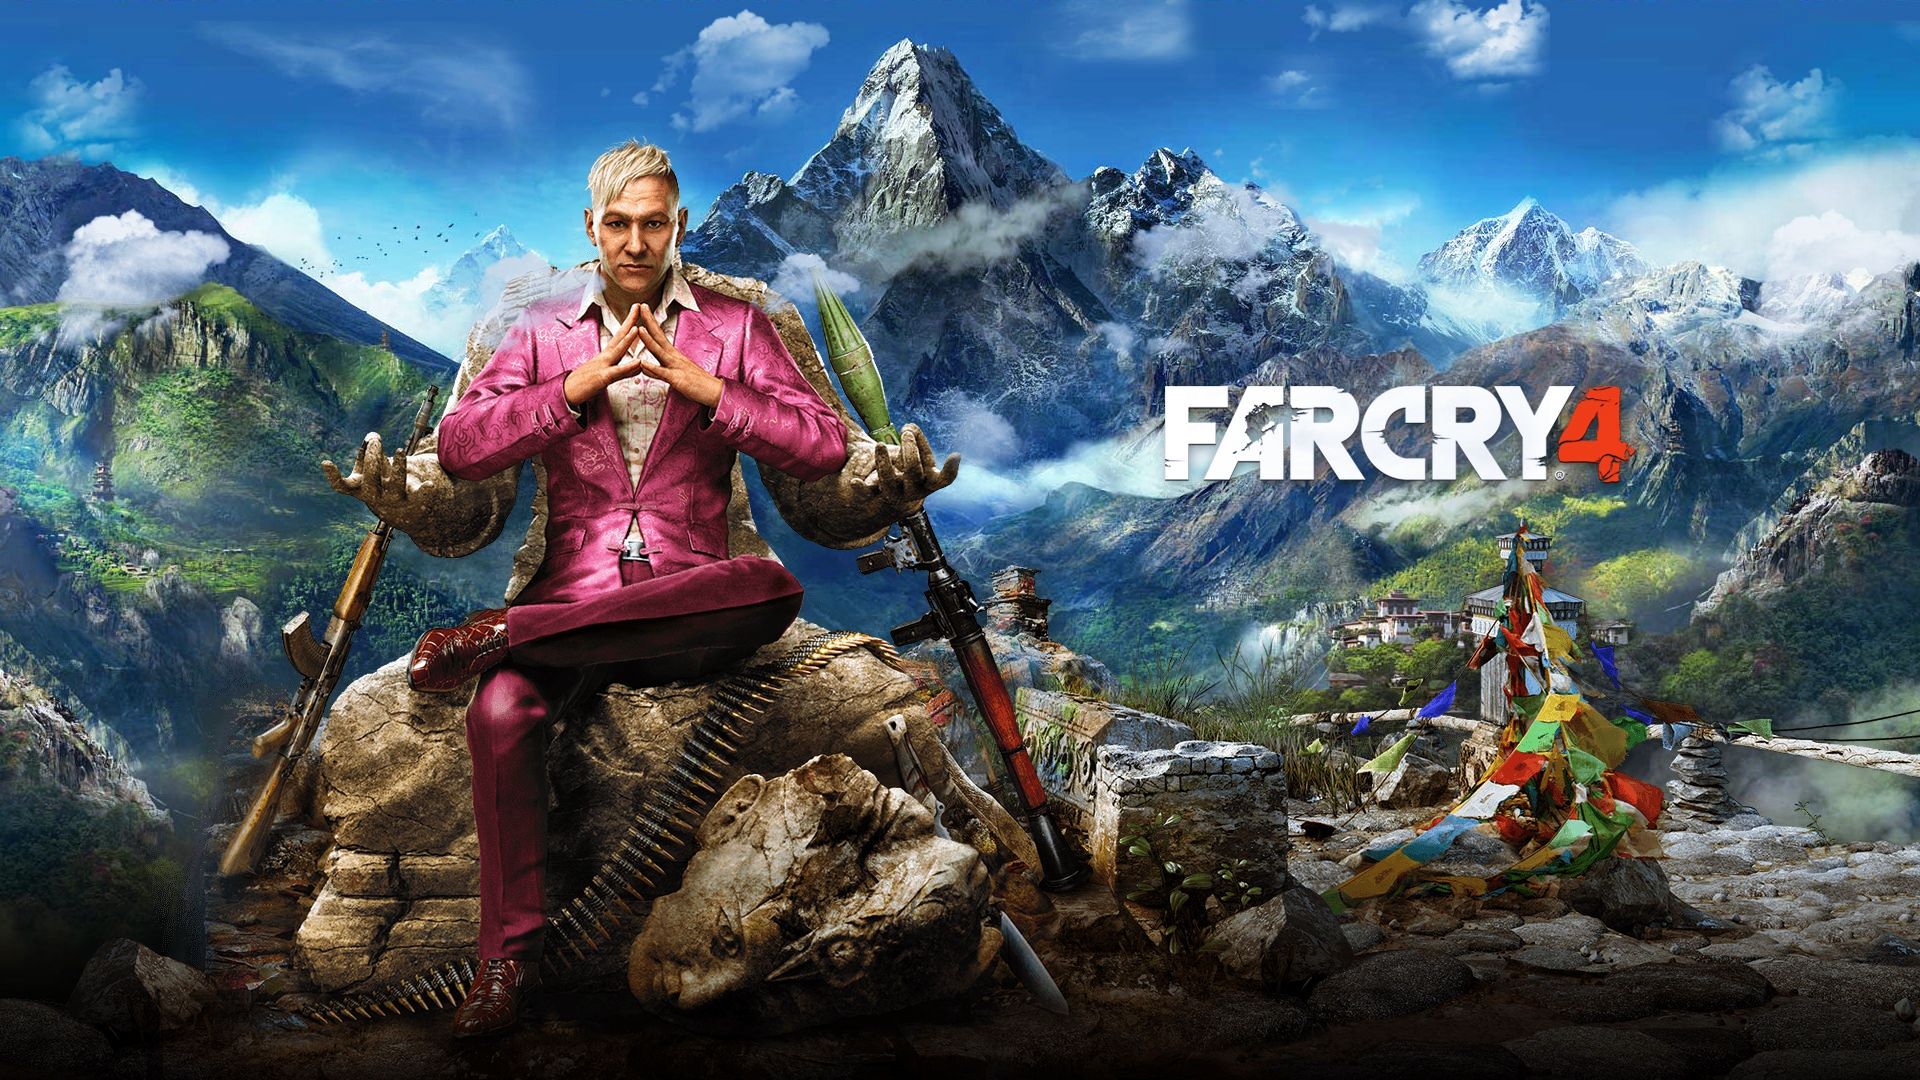 HD Quality Wallpaper | Collection: Video Game, 1920x1080 Far Cry 4